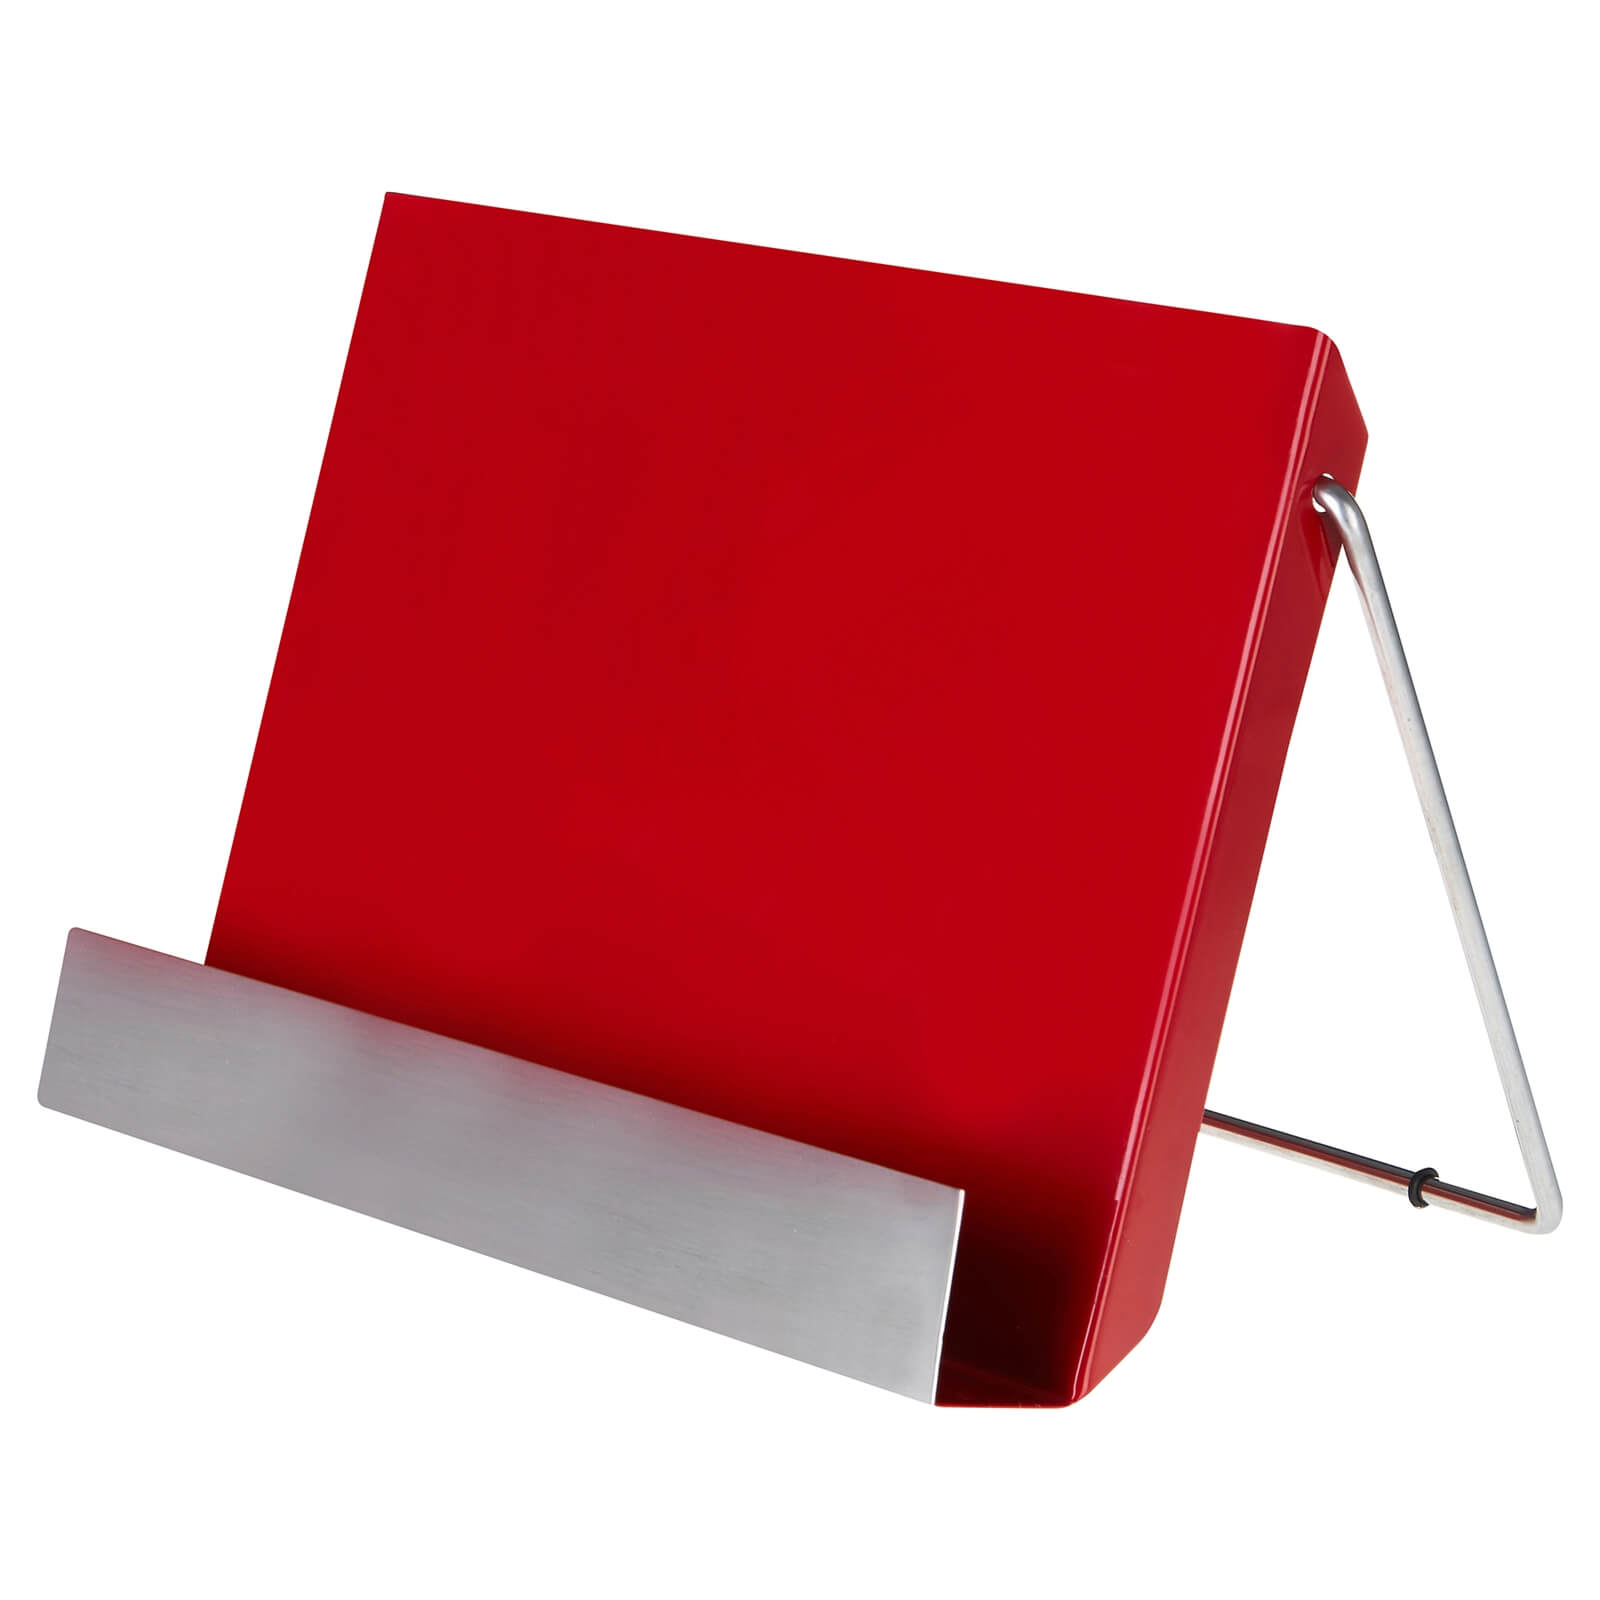 Recipe Stand - Red Enamel